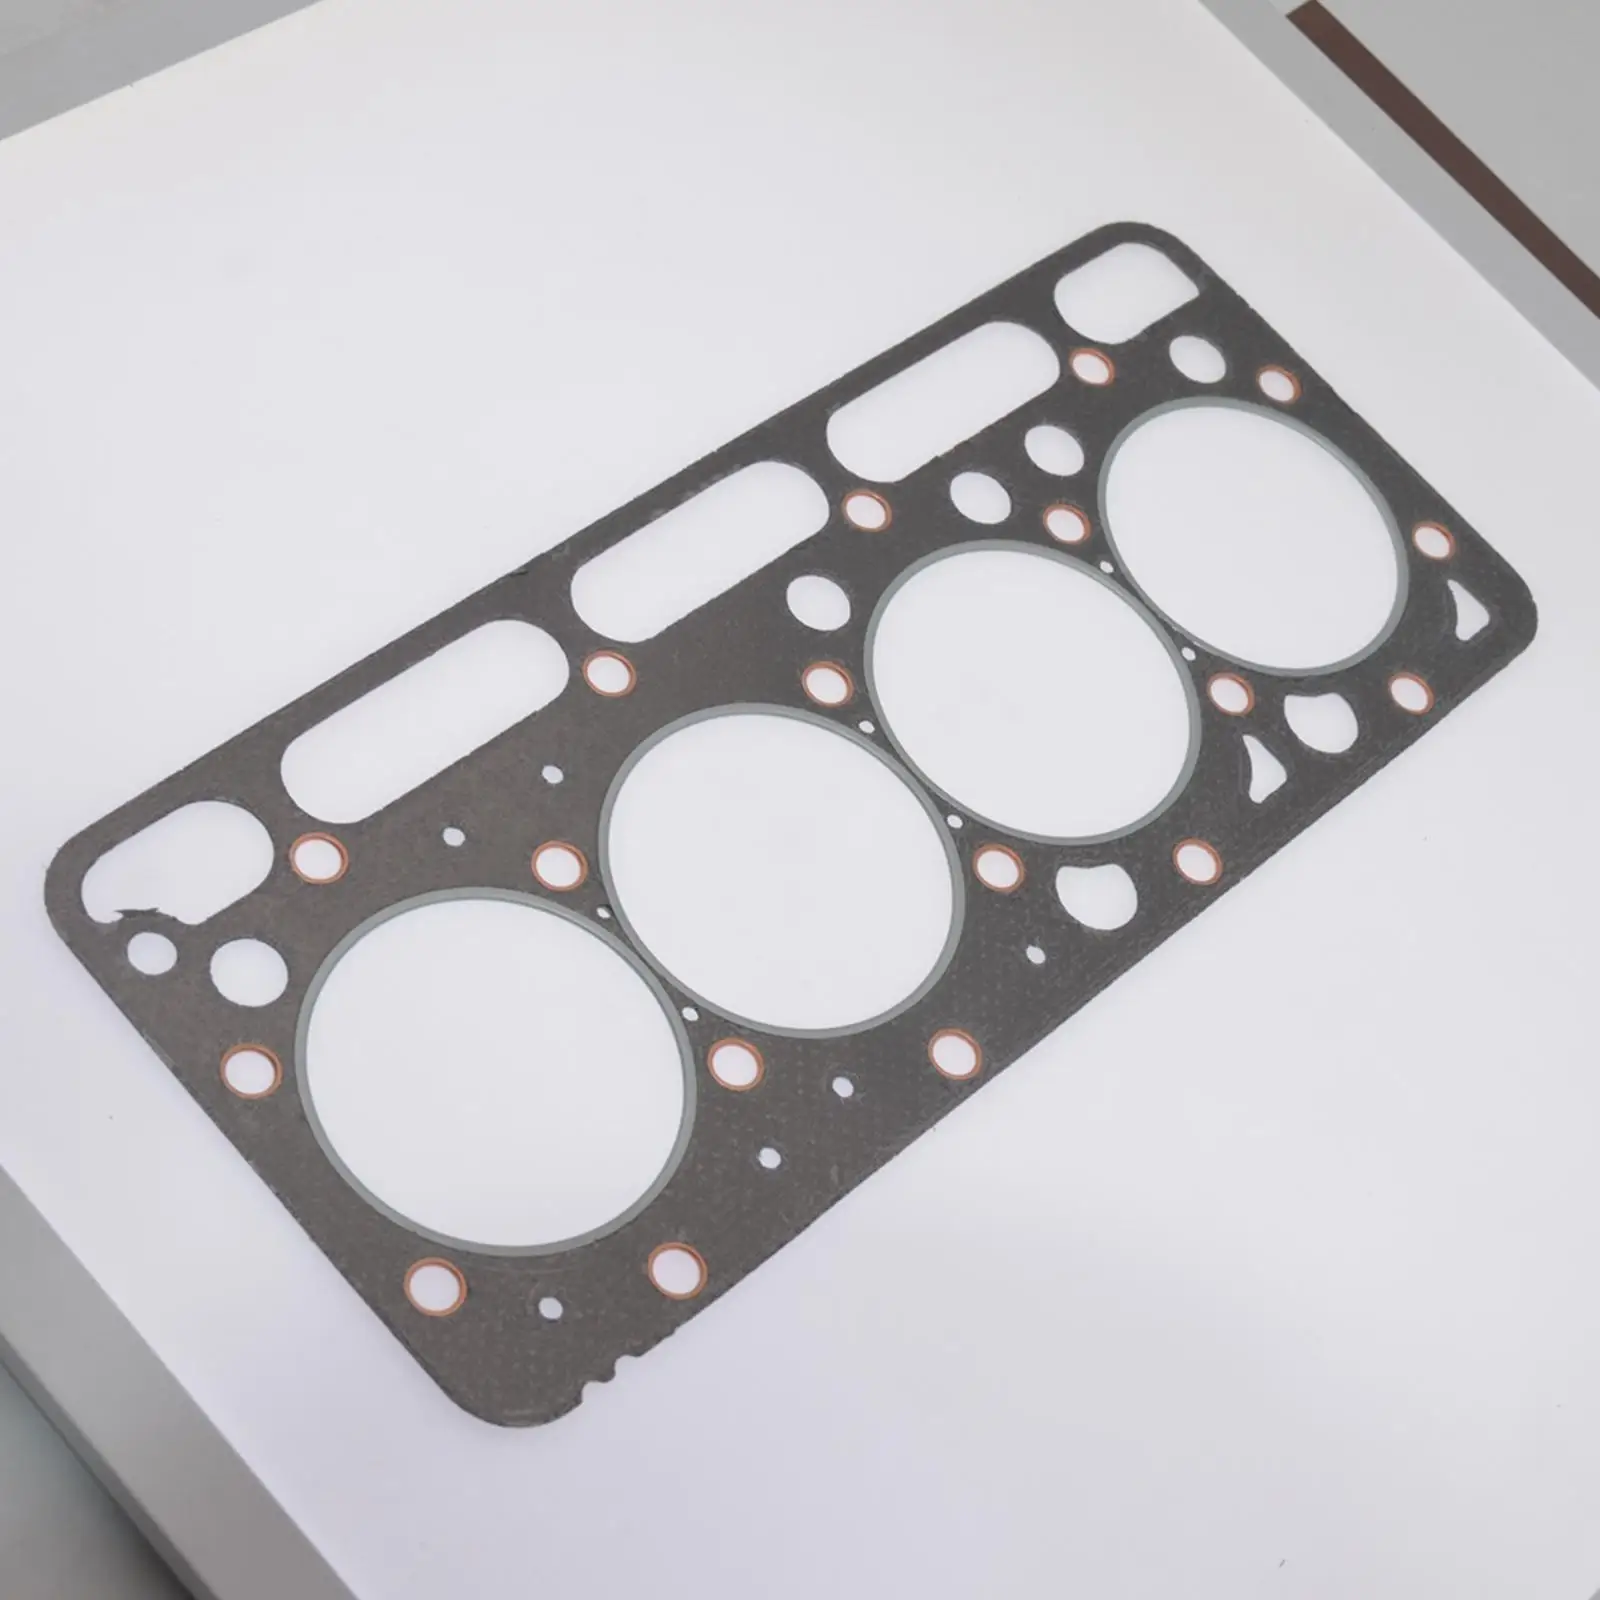 Cylinder Head Gasket Accessory Replaces Premium Easy to Install Composite Metal Parts Professional for Kubota Bobcat